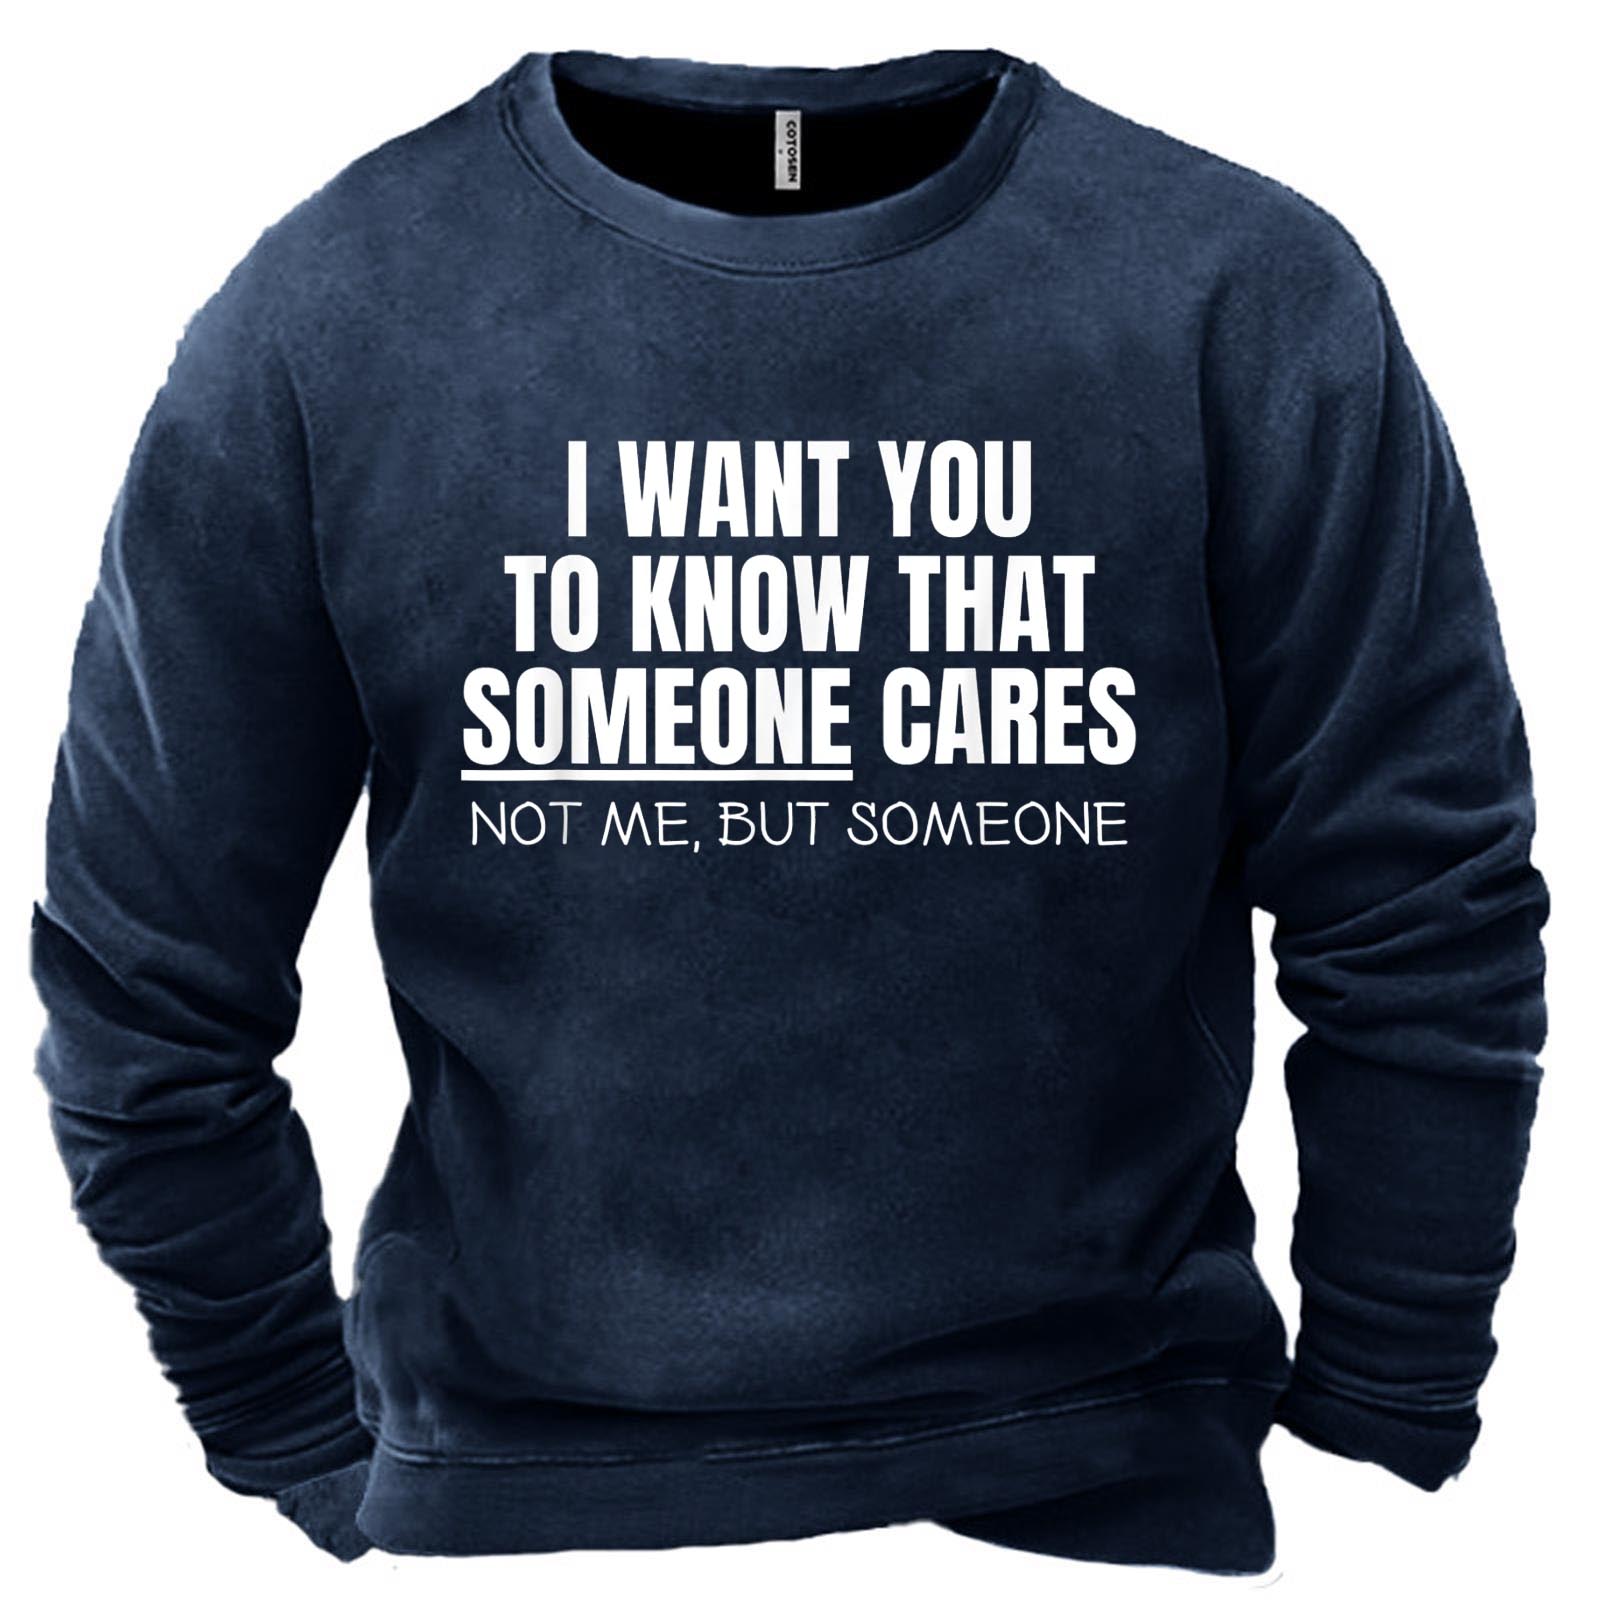 Men's I Want You Chic To Know That Someone Cares Print Sweatshirt